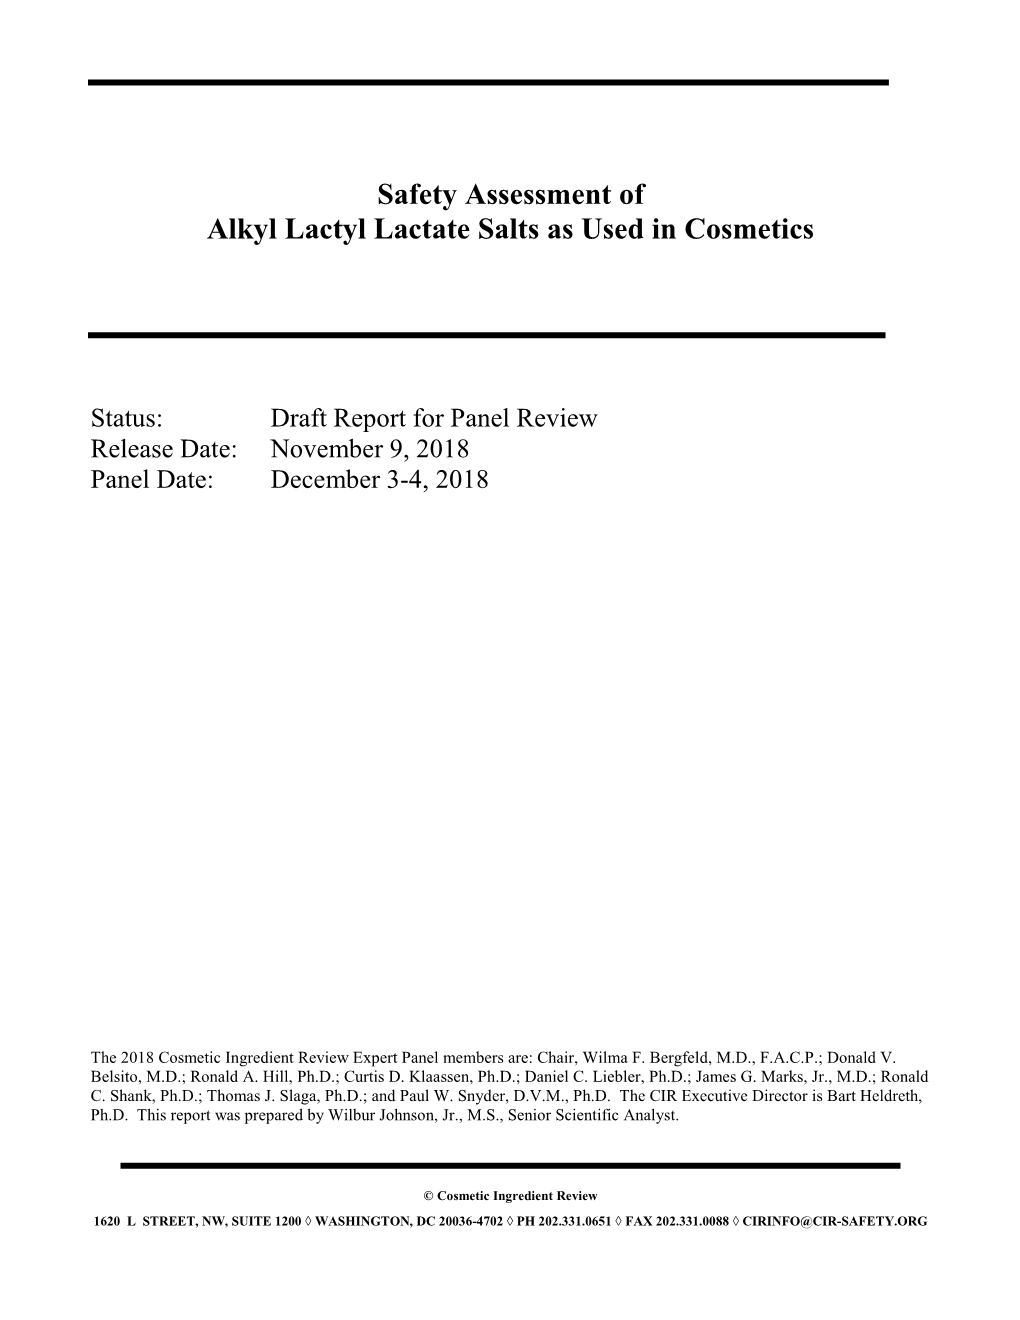 Safety Assessment of Alkyl Lactyl Lactate Salts As Used in Cosmetics